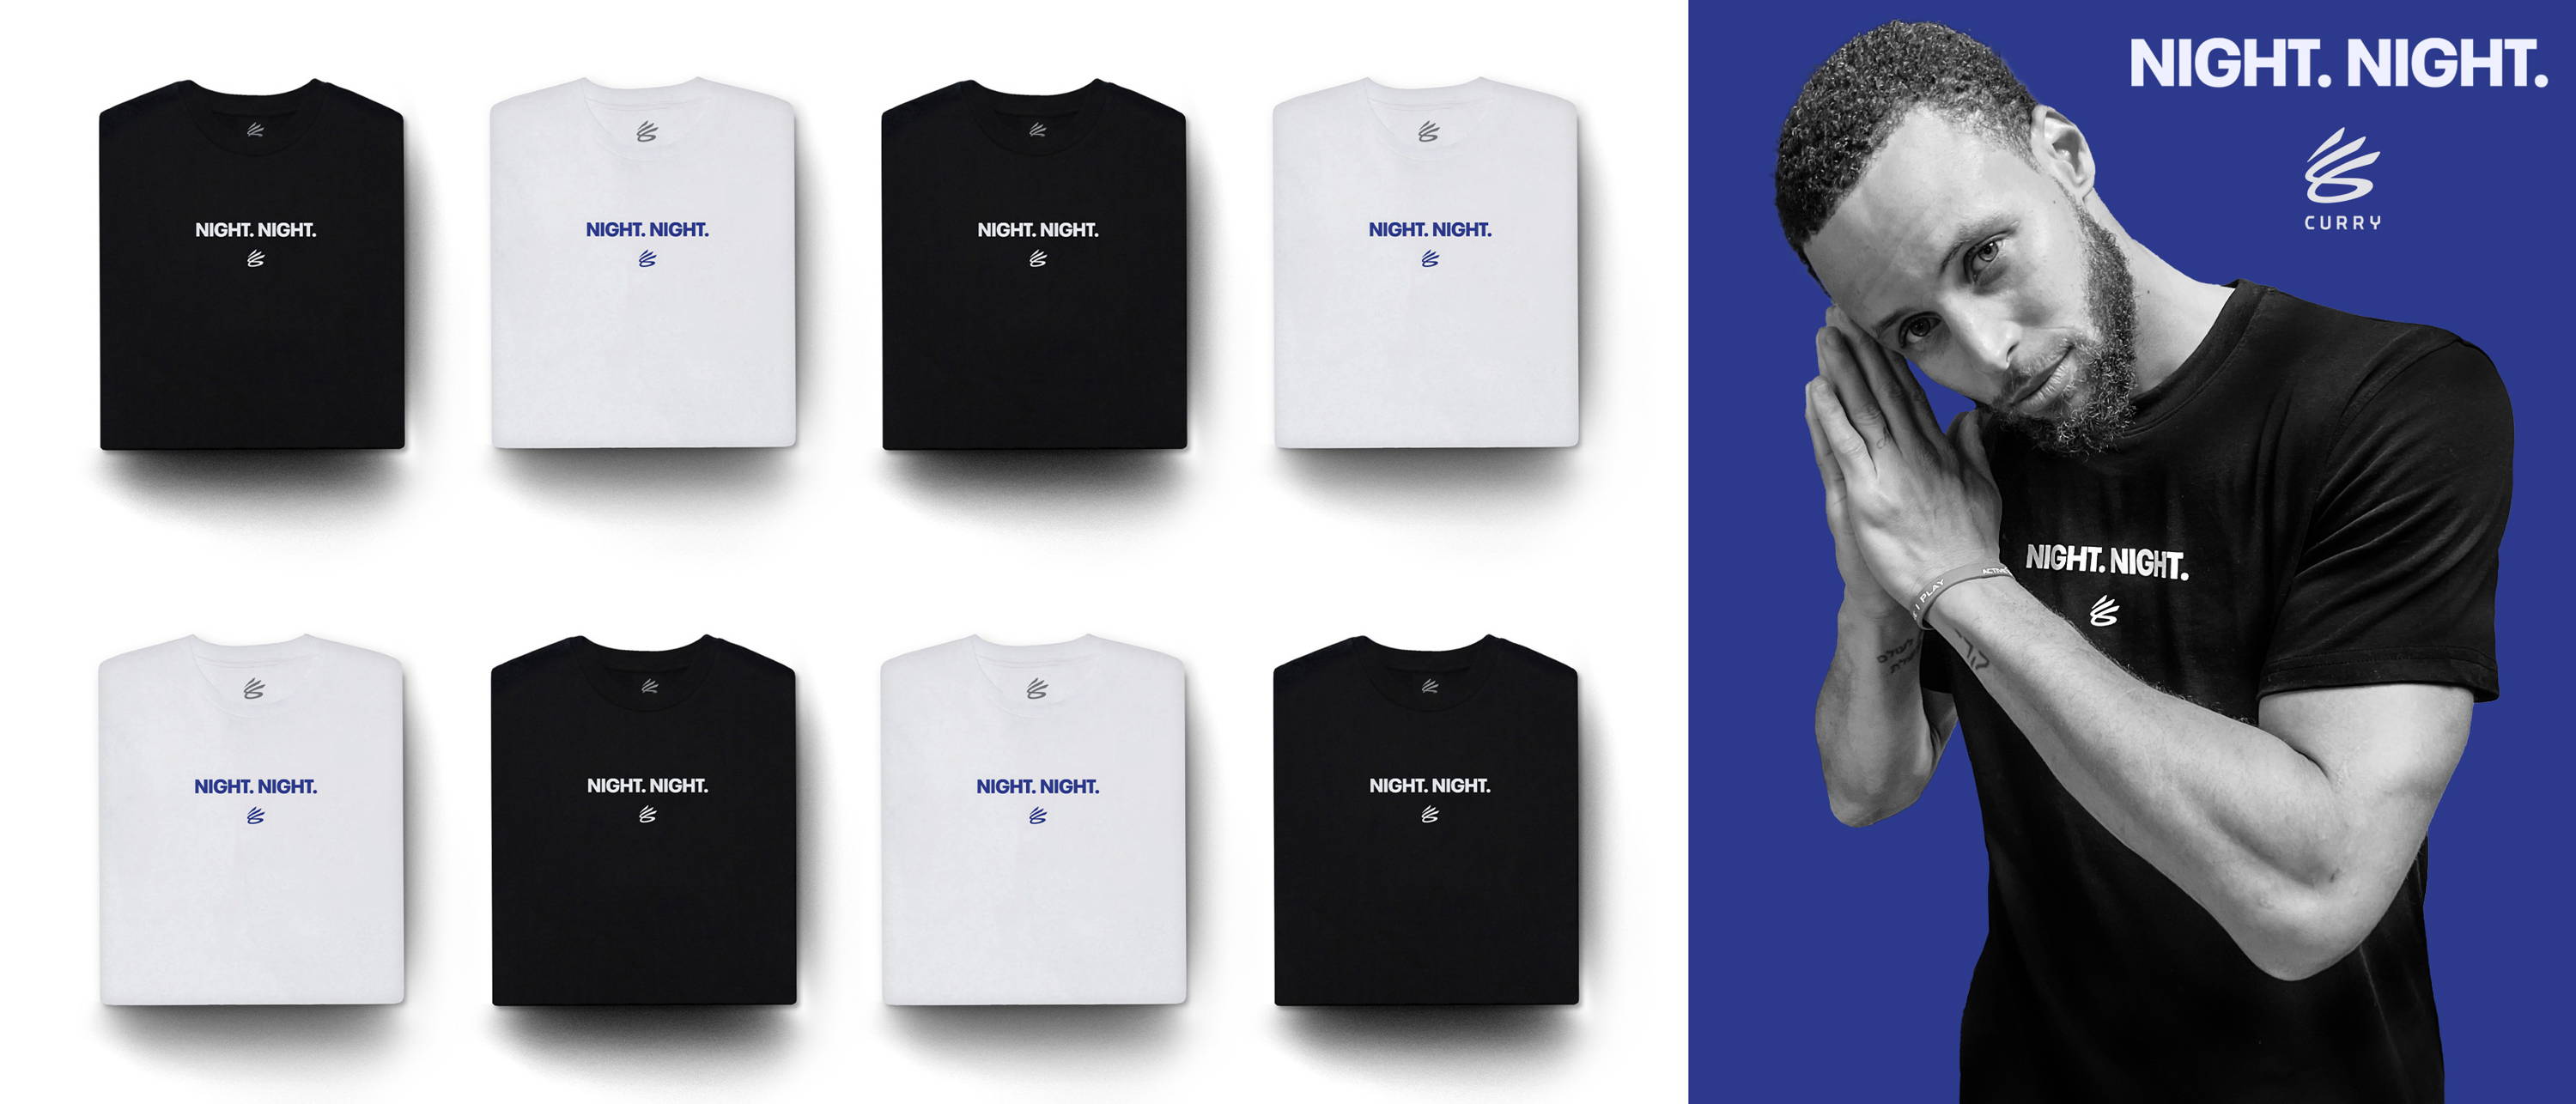 sp exclusive stephen curry night night clothing collection 